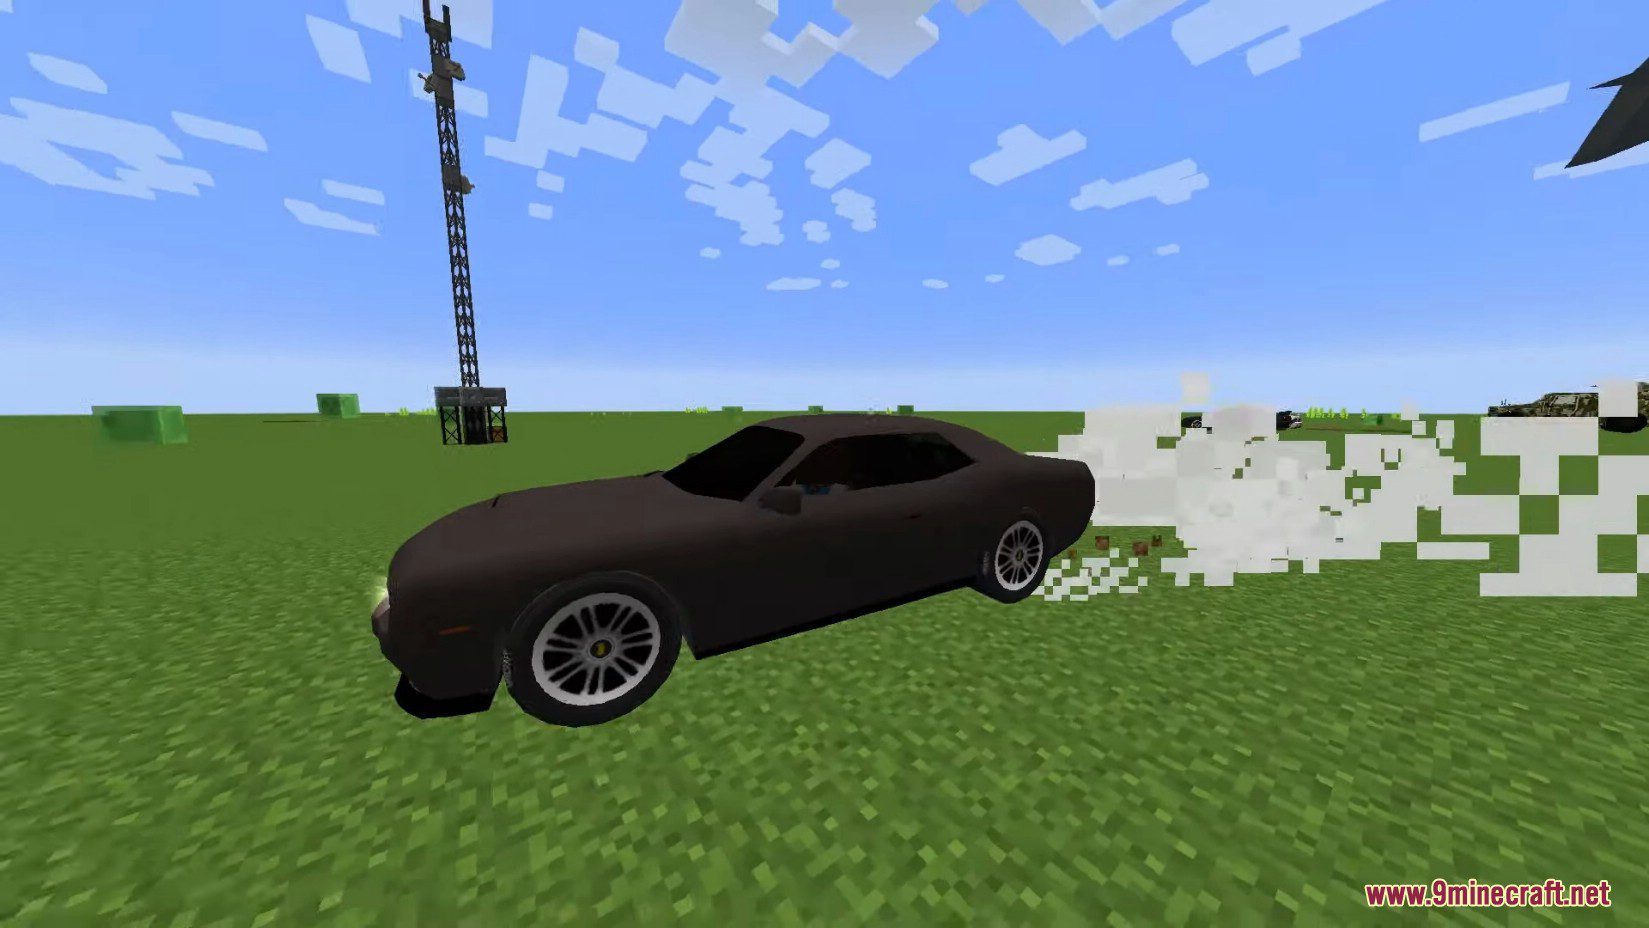 Mcheli Overdrive Mod (1.7.10) - Largest Cars and Planes Mod 9